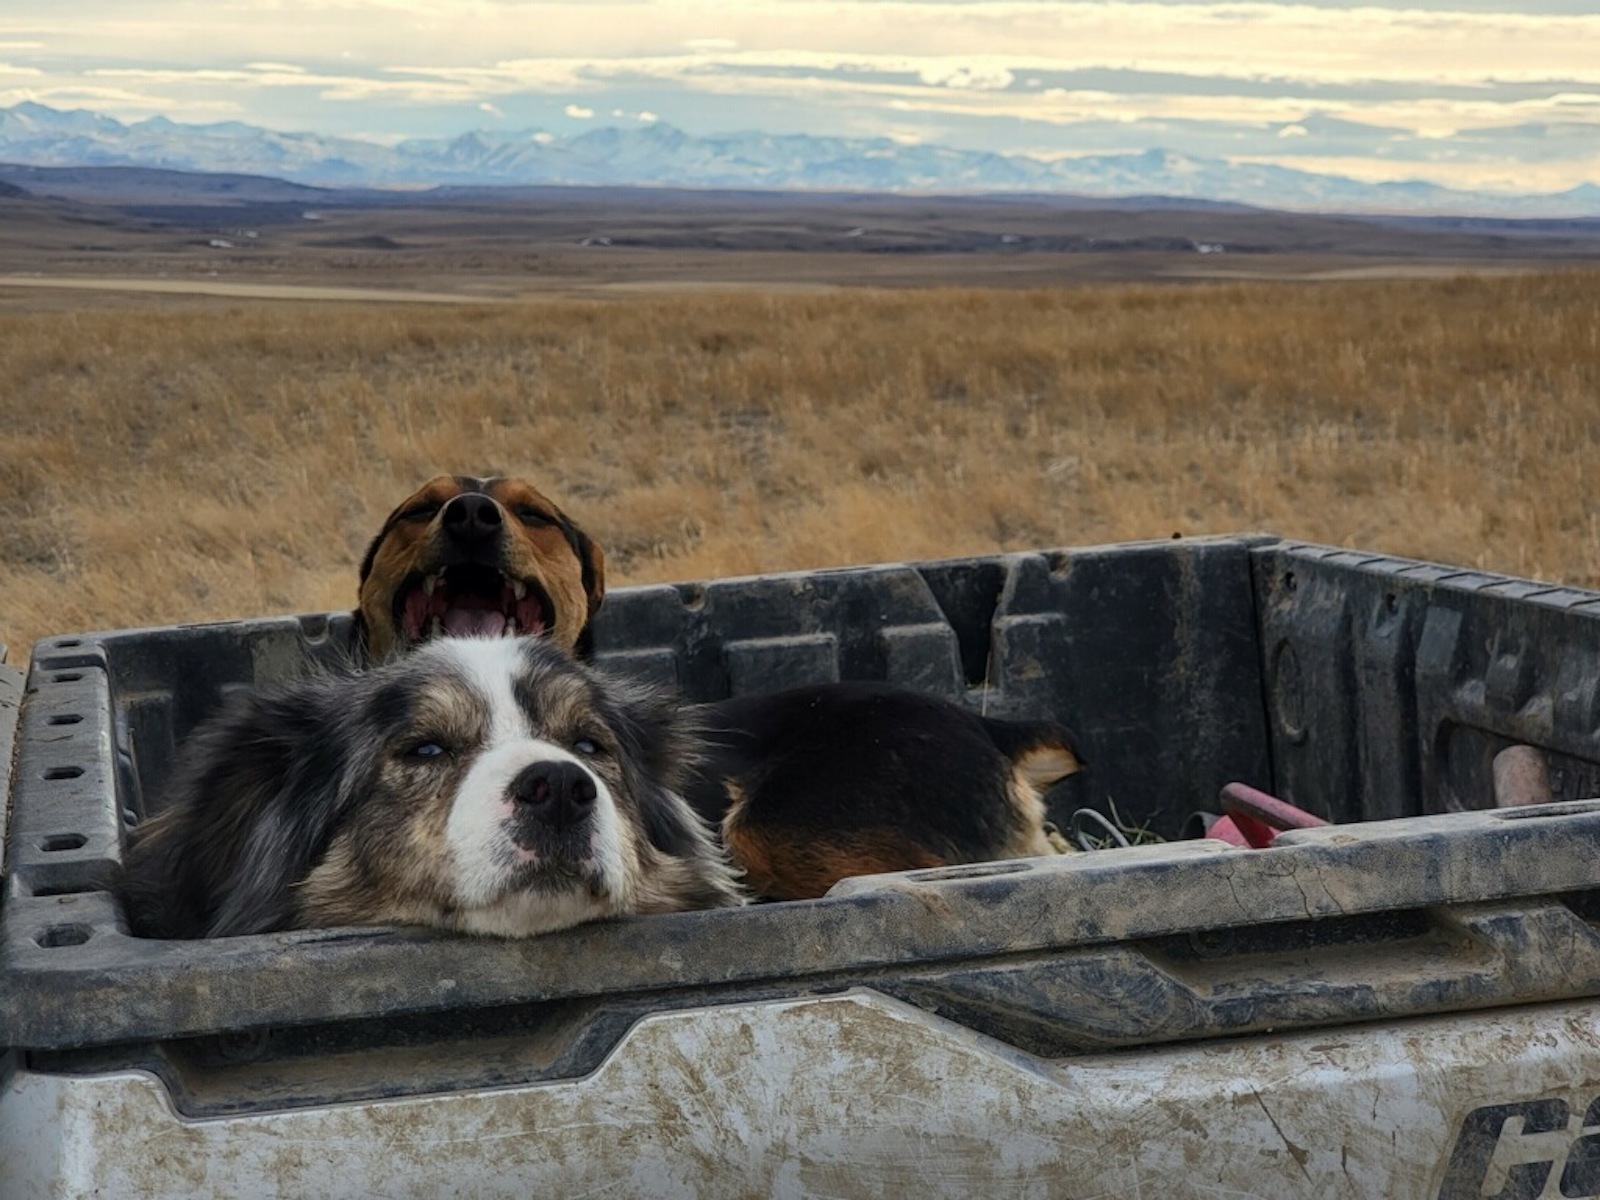 a sheep dog naps in the back of a truck